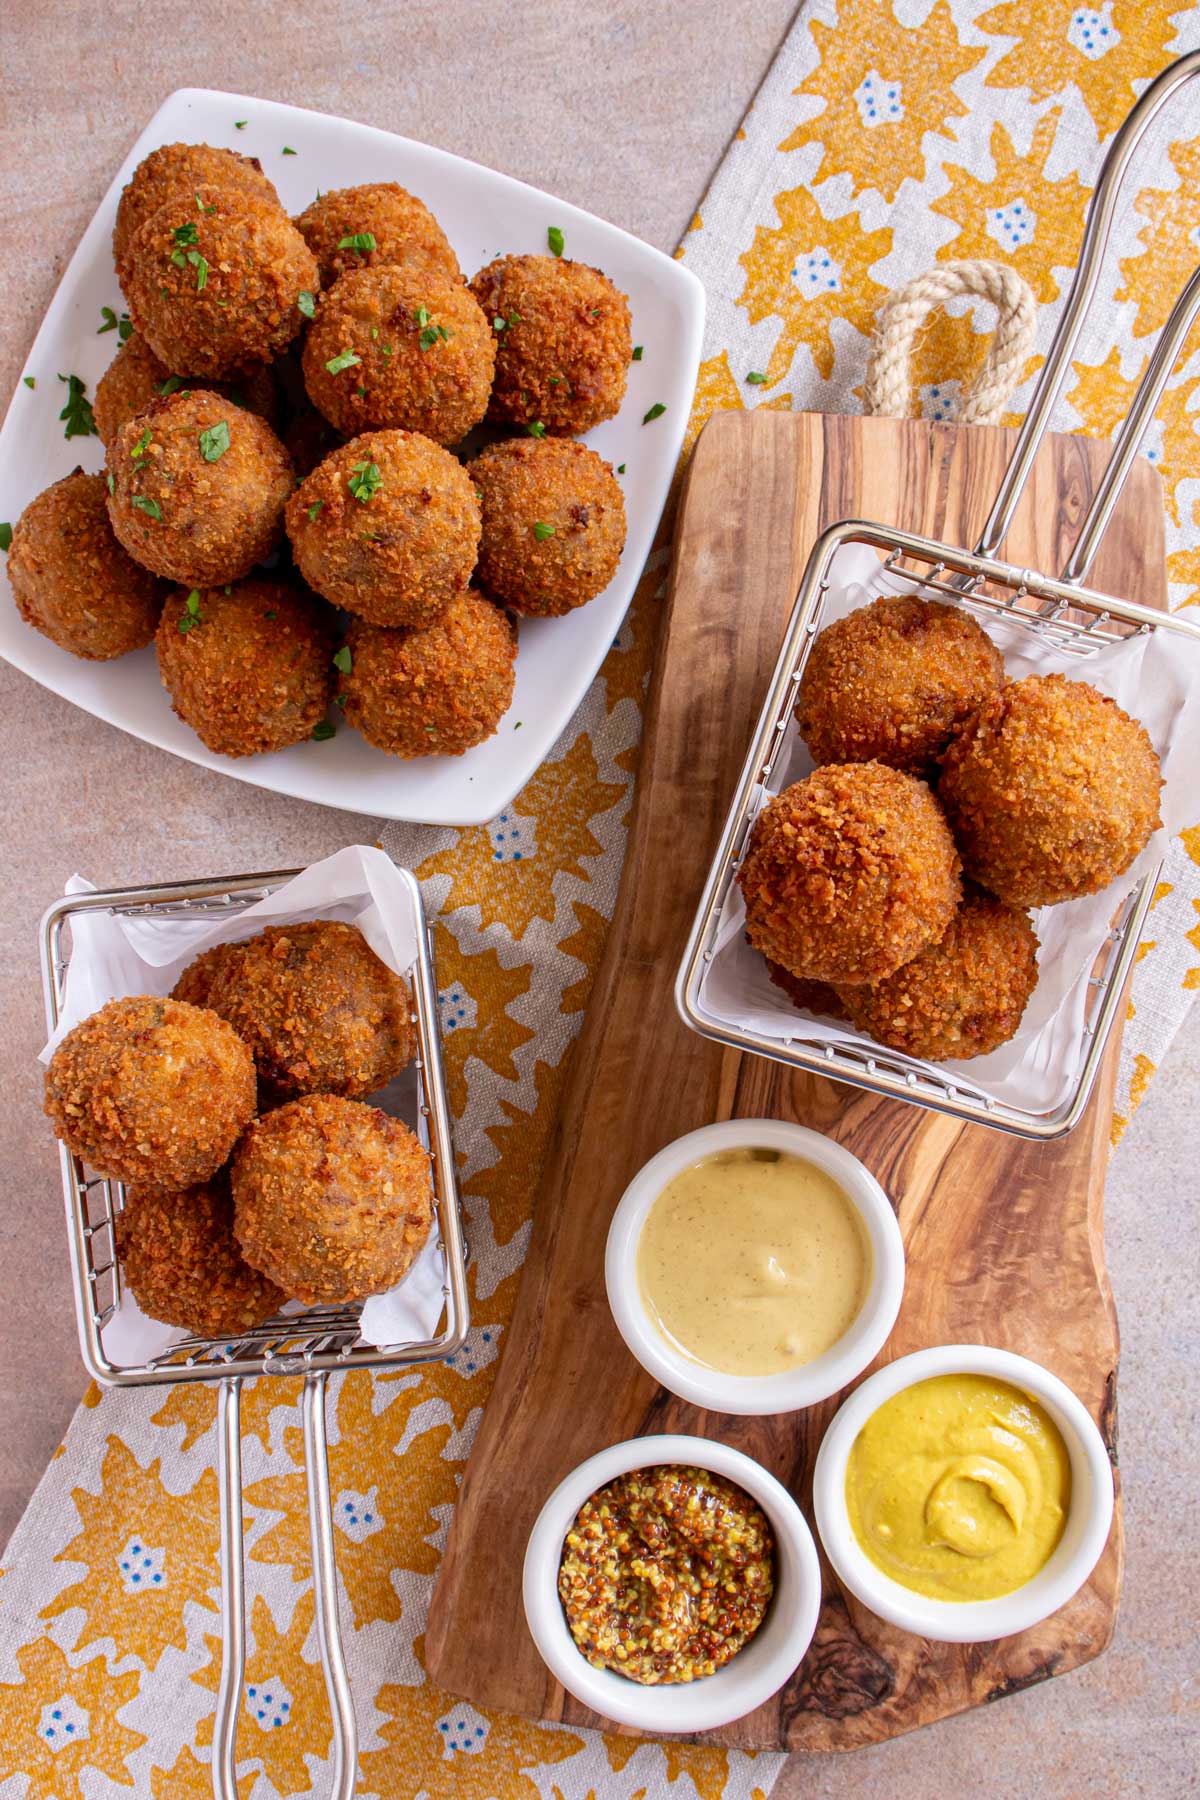 Bitterballen served on a white plate and small metal baskets with small cups of mustard.